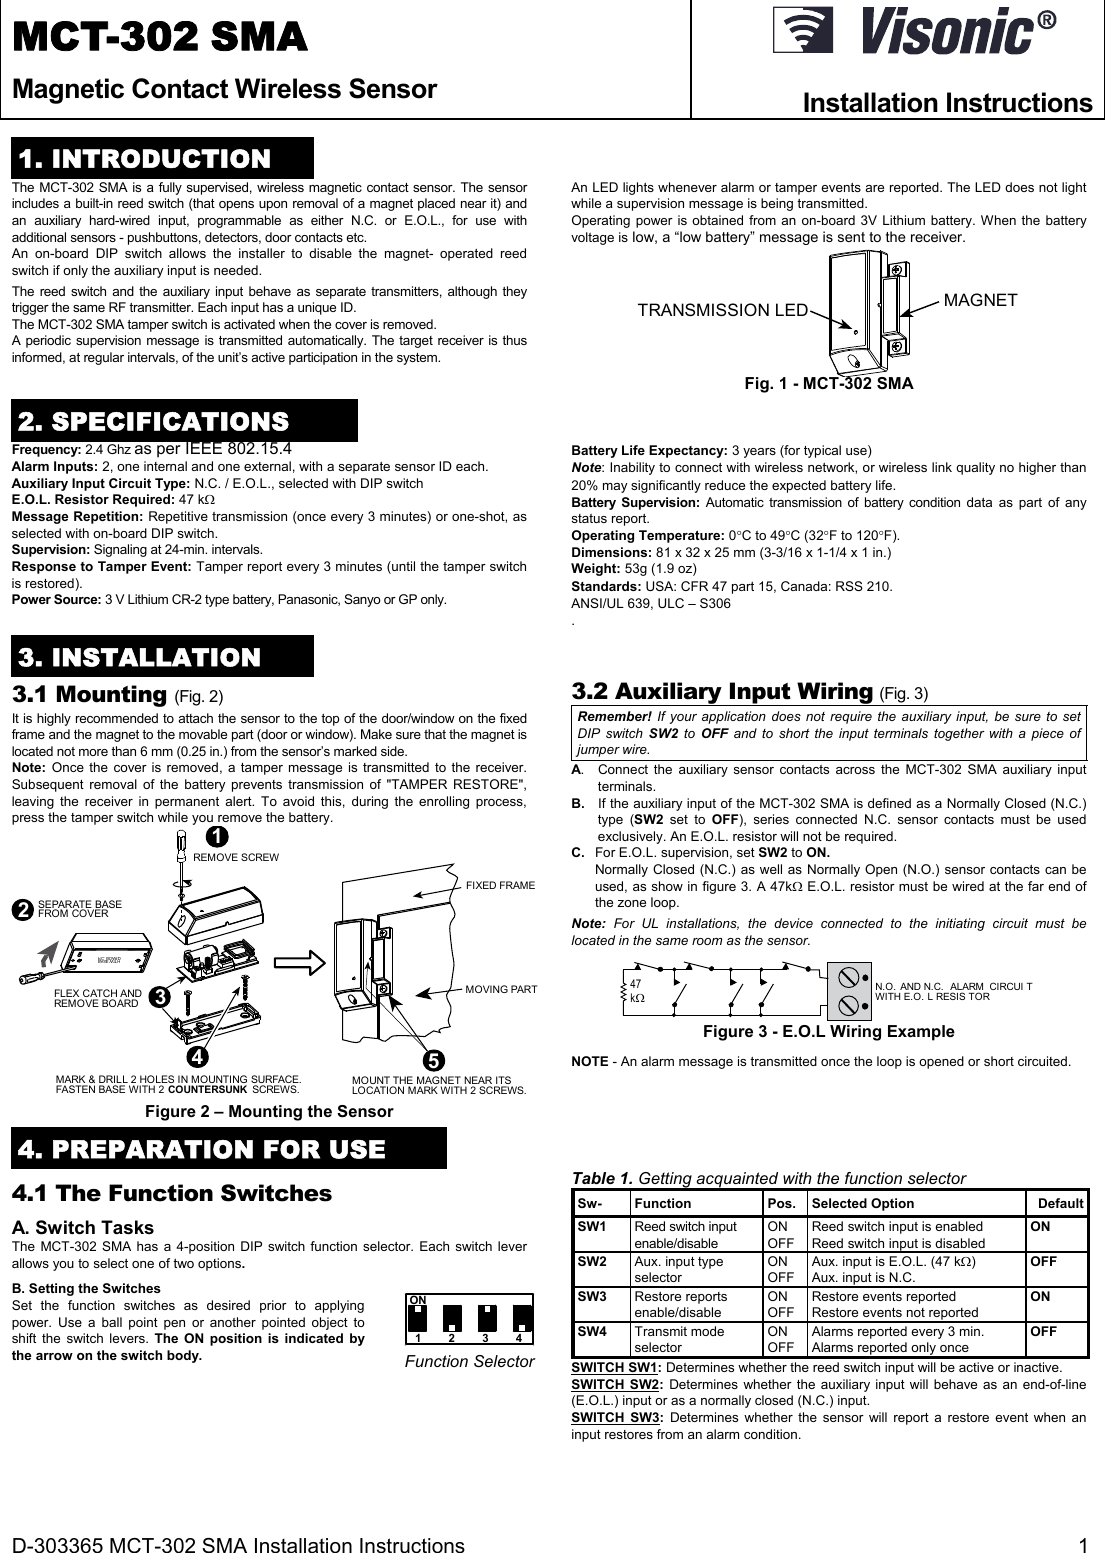 D-303365 MCT-302 SMA Installation Instructions  1 MCT-302 SMA Magnetic Contact Wireless Sensor   Installation Instructions    1. INTRODUCTION The MCT-302 SMA is a fully supervised, wireless magnetic contact sensor. The sensor includes a built-in reed switch (that opens upon removal of a magnet placed near it) and an auxiliary hard-wired input, programmable as either N.C. or E.O.L., for use with additional sensors - pushbuttons, detectors, door contacts etc.  An on-board DIP switch allows the installer to disable the magnet- operated reed switch if only the auxiliary input is needed.  The reed switch and the auxiliary input behave as separate transmitters, although they trigger the same RF transmitter. Each input has a unique ID.  The MCT-302 SMA tamper switch is activated when the cover is removed.  A periodic supervision message is transmitted automatically. The target receiver is thus informed, at regular intervals, of the unit’s active participation in the system. An LED lights whenever alarm or tamper events are reported. The LED does not light while a supervision message is being transmitted.  Operating power is obtained from an on-board 3V Lithium battery. When the battery voltage is low, a “low battery” message is sent to the receiver. MAGNETTRANSMISSION LED Fig. 1 - MCT-302 SMA 2. SPECIFICATIONS Frequency: 2.4 Ghz as per IEEE 802.15.4 Alarm Inputs: 2, one internal and one external, with a separate sensor ID each. Auxiliary Input Circuit Type: N.C. / E.O.L., selected with DIP switch E.O.L. Resistor Required: 47 k Message Repetition: Repetitive transmission (once every 3 minutes) or one-shot, as selected with on-board DIP switch. Supervision: Signaling at 24-min. intervals.  Response to Tamper Event: Tamper report every 3 minutes (until the tamper switch is restored). Power Source: 3 V Lithium CR-2 type battery, Panasonic, Sanyo or GP only. Battery Life Expectancy: 3 years (for typical use) Note: Inability to connect with wireless network, or wireless link quality no higher than 20% may significantly reduce the expected battery life. Battery Supervision: Automatic transmission of battery condition data as part of any status report. Operating Temperature: 0C to 49C (32F to 120F). Dimensions: 81 x 32 x 25 mm (3-3/16 x 1-1/4 x 1 in.) Weight: 53g (1.9 oz) Standards: USA: CFR 47 part 15, Canada: RSS 210. ANSI/UL 639, ULC – S306 . 3. INSTALLATION 3.1 Mounting (Fig. 2) It is highly recommended to attach the sensor to the top of the door/window on the fixed frame and the magnet to the movable part (door or window). Make sure that the magnet is located not more than 6 mm (0.25 in.) from the sensor’s marked side.  Note:  Once the cover is removed, a tamper message is transmitted to the receiver. Subsequent removal of the battery prevents transmission of &quot;TAMPER RESTORE&quot;, leaving the receiver in permanent alert. To avoid this, during the enrolling process, press the tamper switch while you remove the battery.  BASE WITHP.C .  BOA RD2SEPARATE BASEFROM COVERMARK &amp; DRILL 2 HOLES IN MOUNTING SURFACE.FASTEN BASE WITH 2 COUNTERSUNK  SCREWS.43FLEX CATCH ANDREMOVE BOARDFIXED FRAMEMOVING PARTMOUNT THE MAGNET NEAR ITSLOCATION MARK WITH 2 SCREWS.51REMOVE SCREW Figure 2 – Mounting the Sensor 3.2 Auxiliary Input Wiring (Fig. 3) Remember! If your application does not require the auxiliary input, be sure to set DIP switch SW2 to OFF and to short the input terminals together with a piece of jumper wire. A.  Connect the auxiliary sensor contacts across the MCT-302 SMA auxiliary input terminals. B.  If the auxiliary input of the MCT-302 SMA is defined as a Normally Closed (N.C.) type (SW2 set to OFF), series connected N.C. sensor contacts must be used exclusively. An E.O.L. resistor will not be required. C.  For E.O.L. supervision, set SW2 to ON. Normally Closed (N.C.) as well as Normally Open (N.O.) sensor contacts can be used, as show in figure 3. A 47k E.O.L. resistor must be wired at the far end of the zone loop. Note: For UL installations, the device connected to the initiating circuit must be located in the same room as the sensor. 47kN.O. AND N.C. ALARM CIRCUI TWITH E.O. L RESIS TOR Figure 3 - E.O.L Wiring Example  NOTE - An alarm message is transmitted once the loop is opened or short circuited. 4. PREPARATION FOR USE 4.1 The Function Switches A. Switch Tasks The MCT-302 SMA has a 4-position DIP switch function selector. Each switch lever allows you to select one of two options. B. Setting the Switches Set the function switches as desired prior to applying power. Use a ball point pen or another pointed object to shift the switch levers. The ON position is indicated by the arrow on the switch body. ON1234 Function Selector Table 1. Getting acquainted with the function selector Sw- Function  Pos. Selected Option  DefaultSW1  Reed switch input enable/disable ON OFF Reed switch input is enabled Reed switch input is disabled ON SW2 Aux. input type selector ON OFF Aux. input is E.O.L. (47 k) Aux. input is N.C. OFF SW3 Restore reports enable/disable ON OFF Restore events reported Restore events not reported ON SW4 Transmit mode selector ON OFF Alarms reported every 3 min. Alarms reported only once OFF SWITCH SW1: Determines whether the reed switch input will be active or inactive. SWITCH SW2: Determines whether the auxiliary input will behave as an end-of-line (E.O.L.) input or as a normally closed (N.C.) input. SWITCH SW3: Determines whether the sensor will report a restore event when an input restores from an alarm condition. 